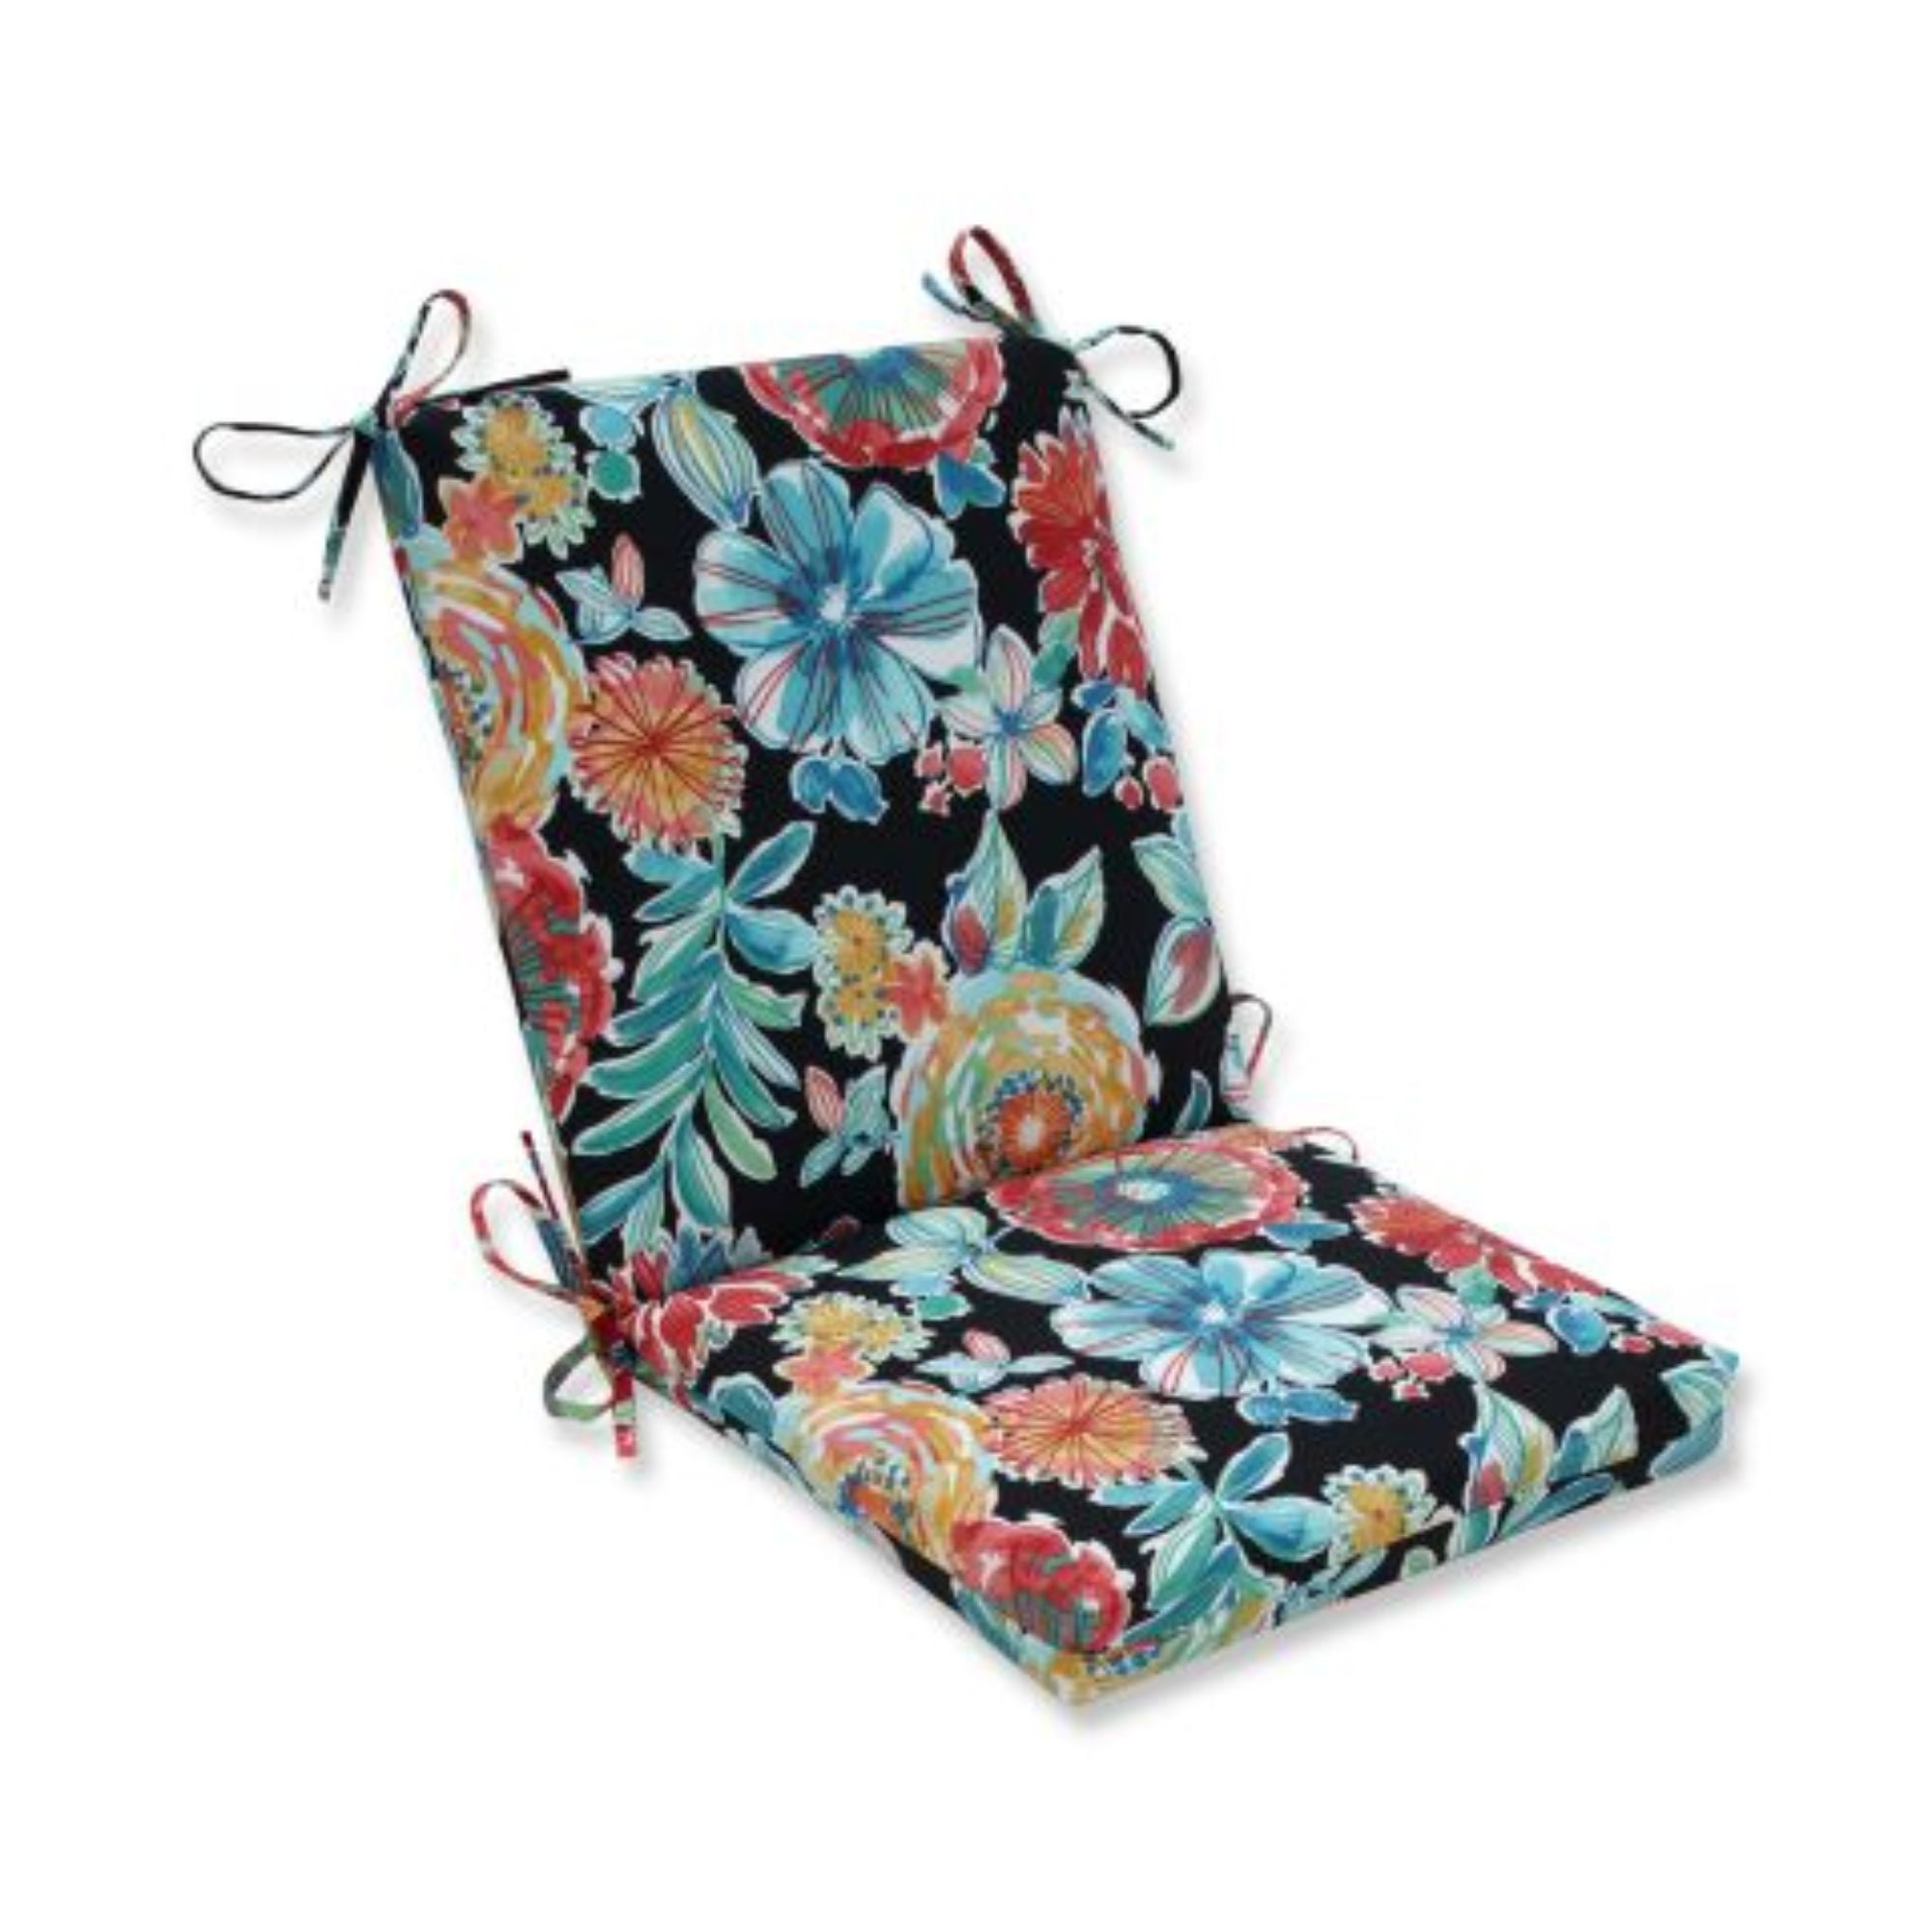 36.5 Summer Flower Outdoor Patio Furniture Square Chair Cushion